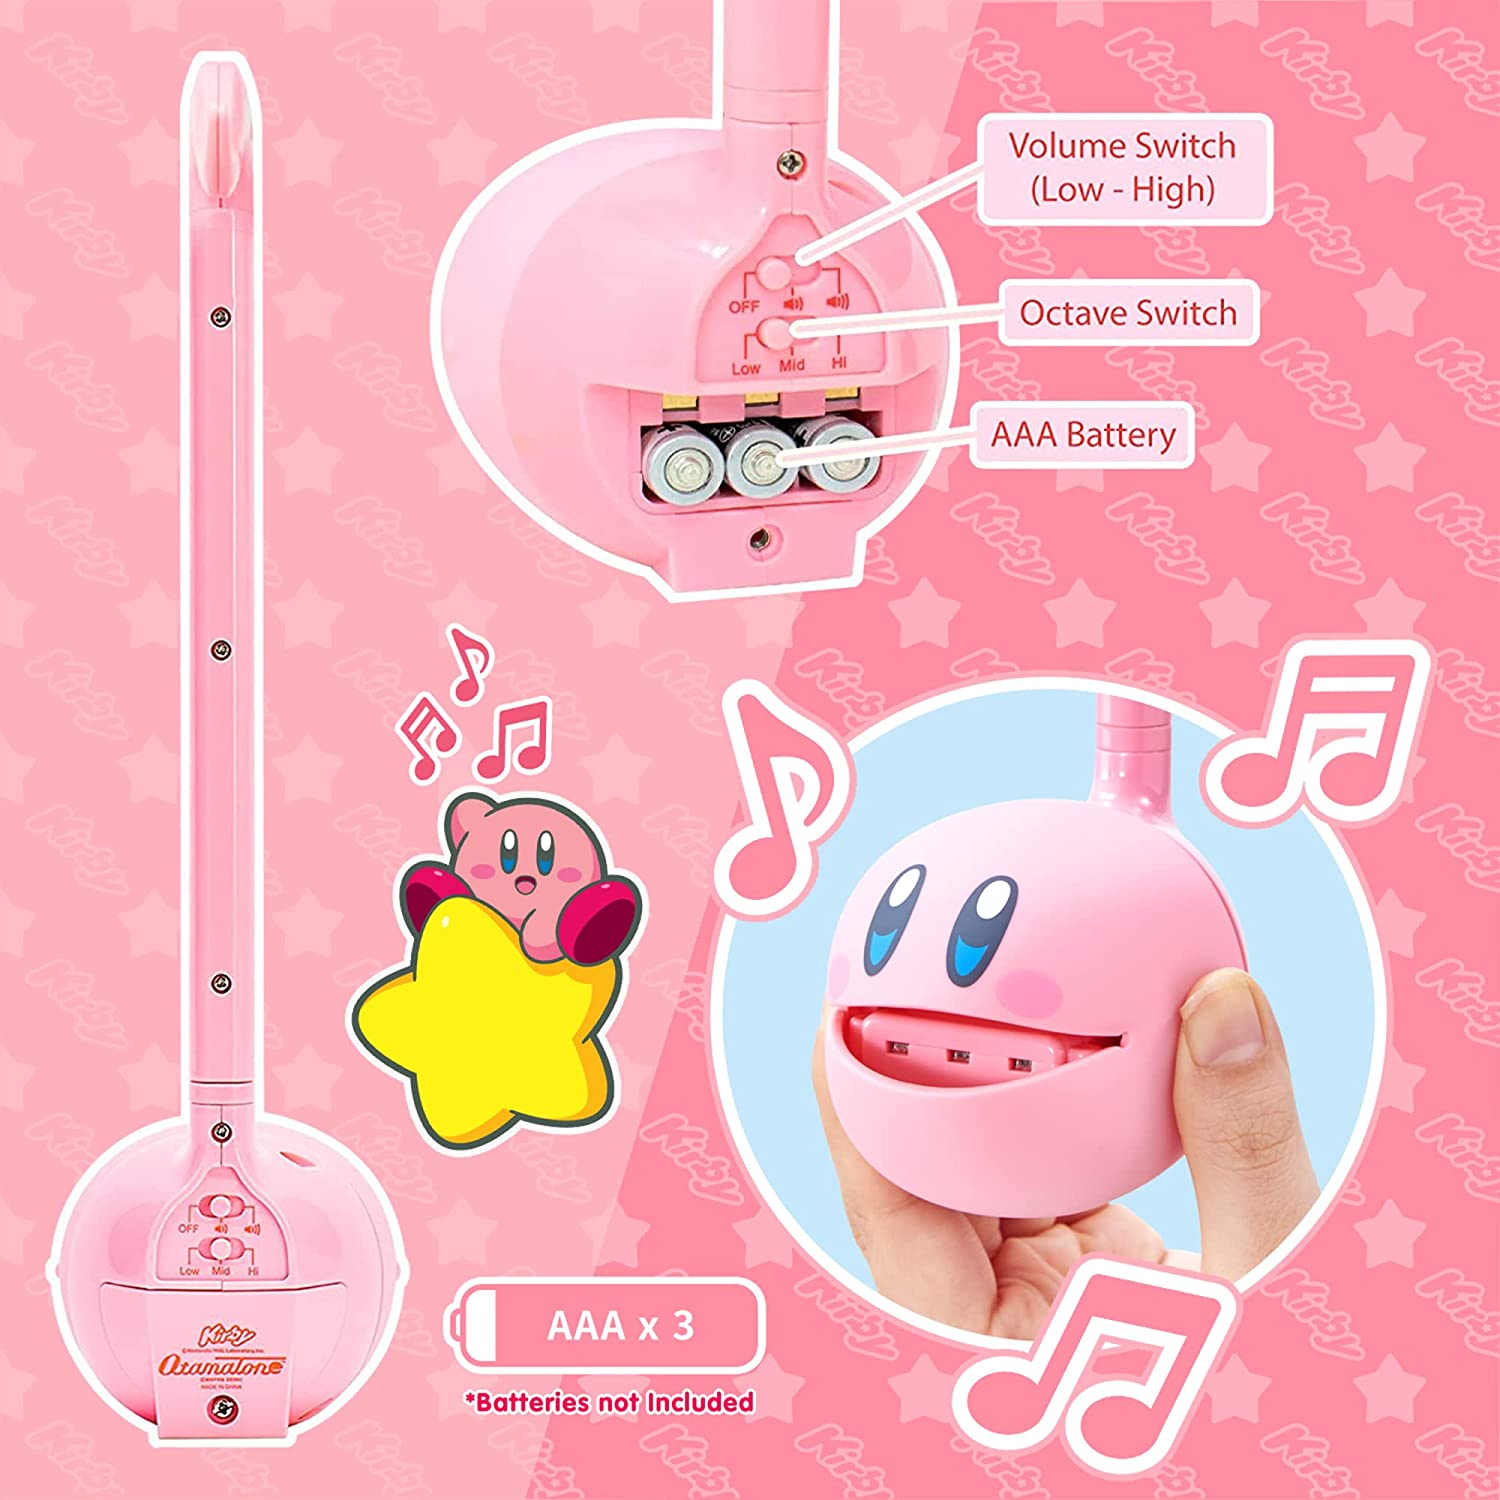 [ most short next day delivery ]otama tone car bi.Ver. practice seat & battery attached Otamatone Kirby Ver. Meiwa electro- machine [ piano pra The one pushed .!]